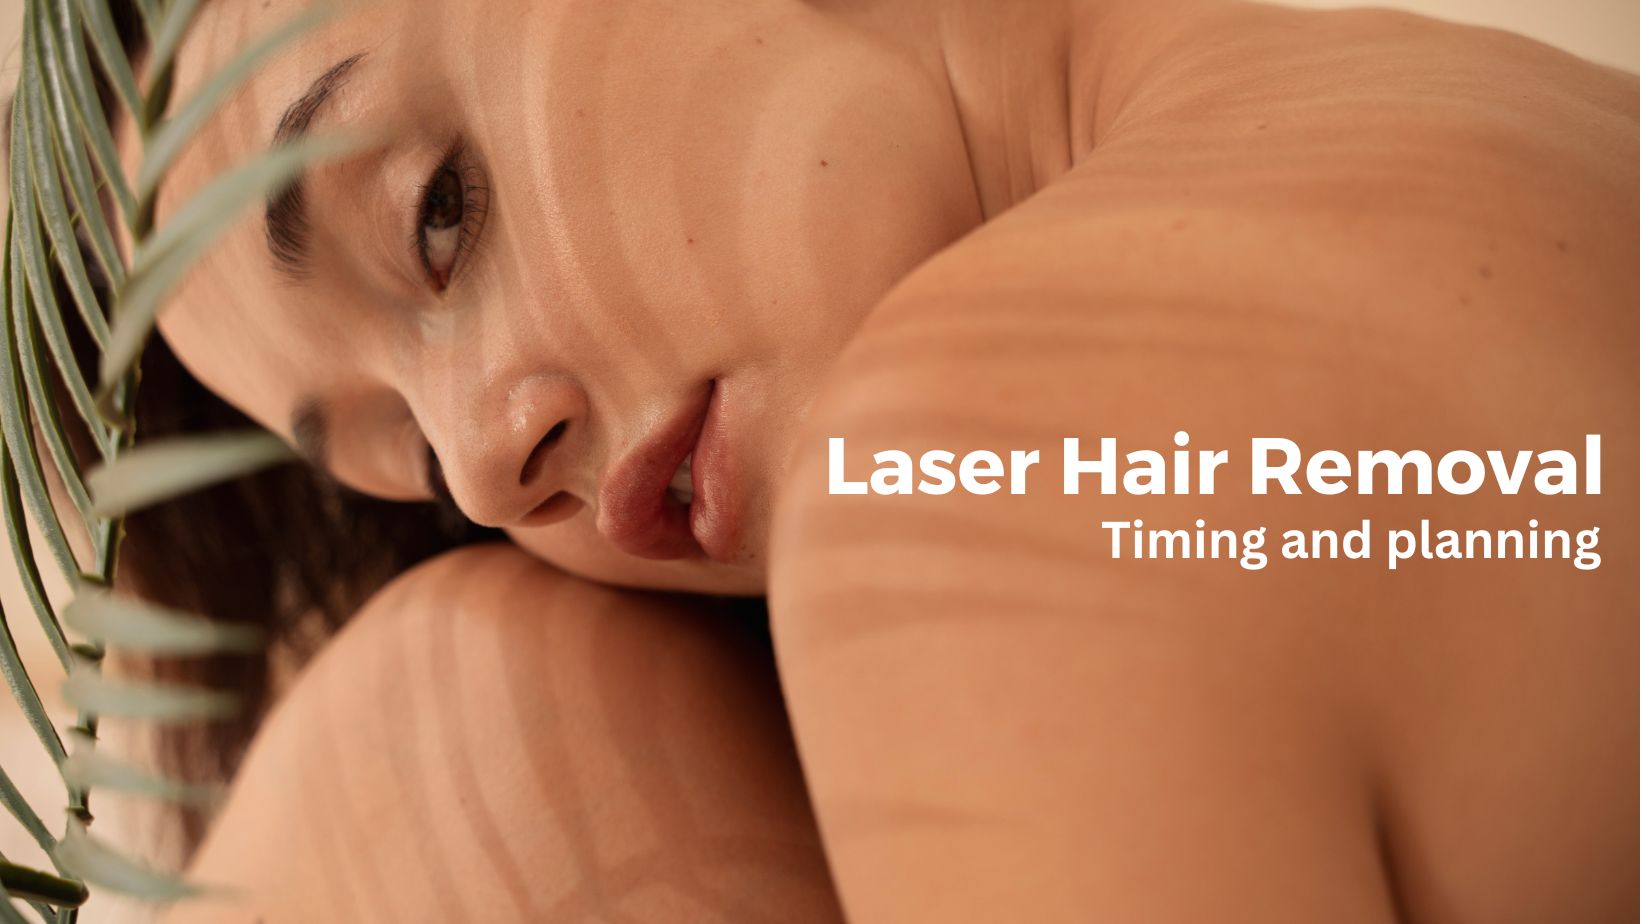 Laser hair removal timing and planning banner